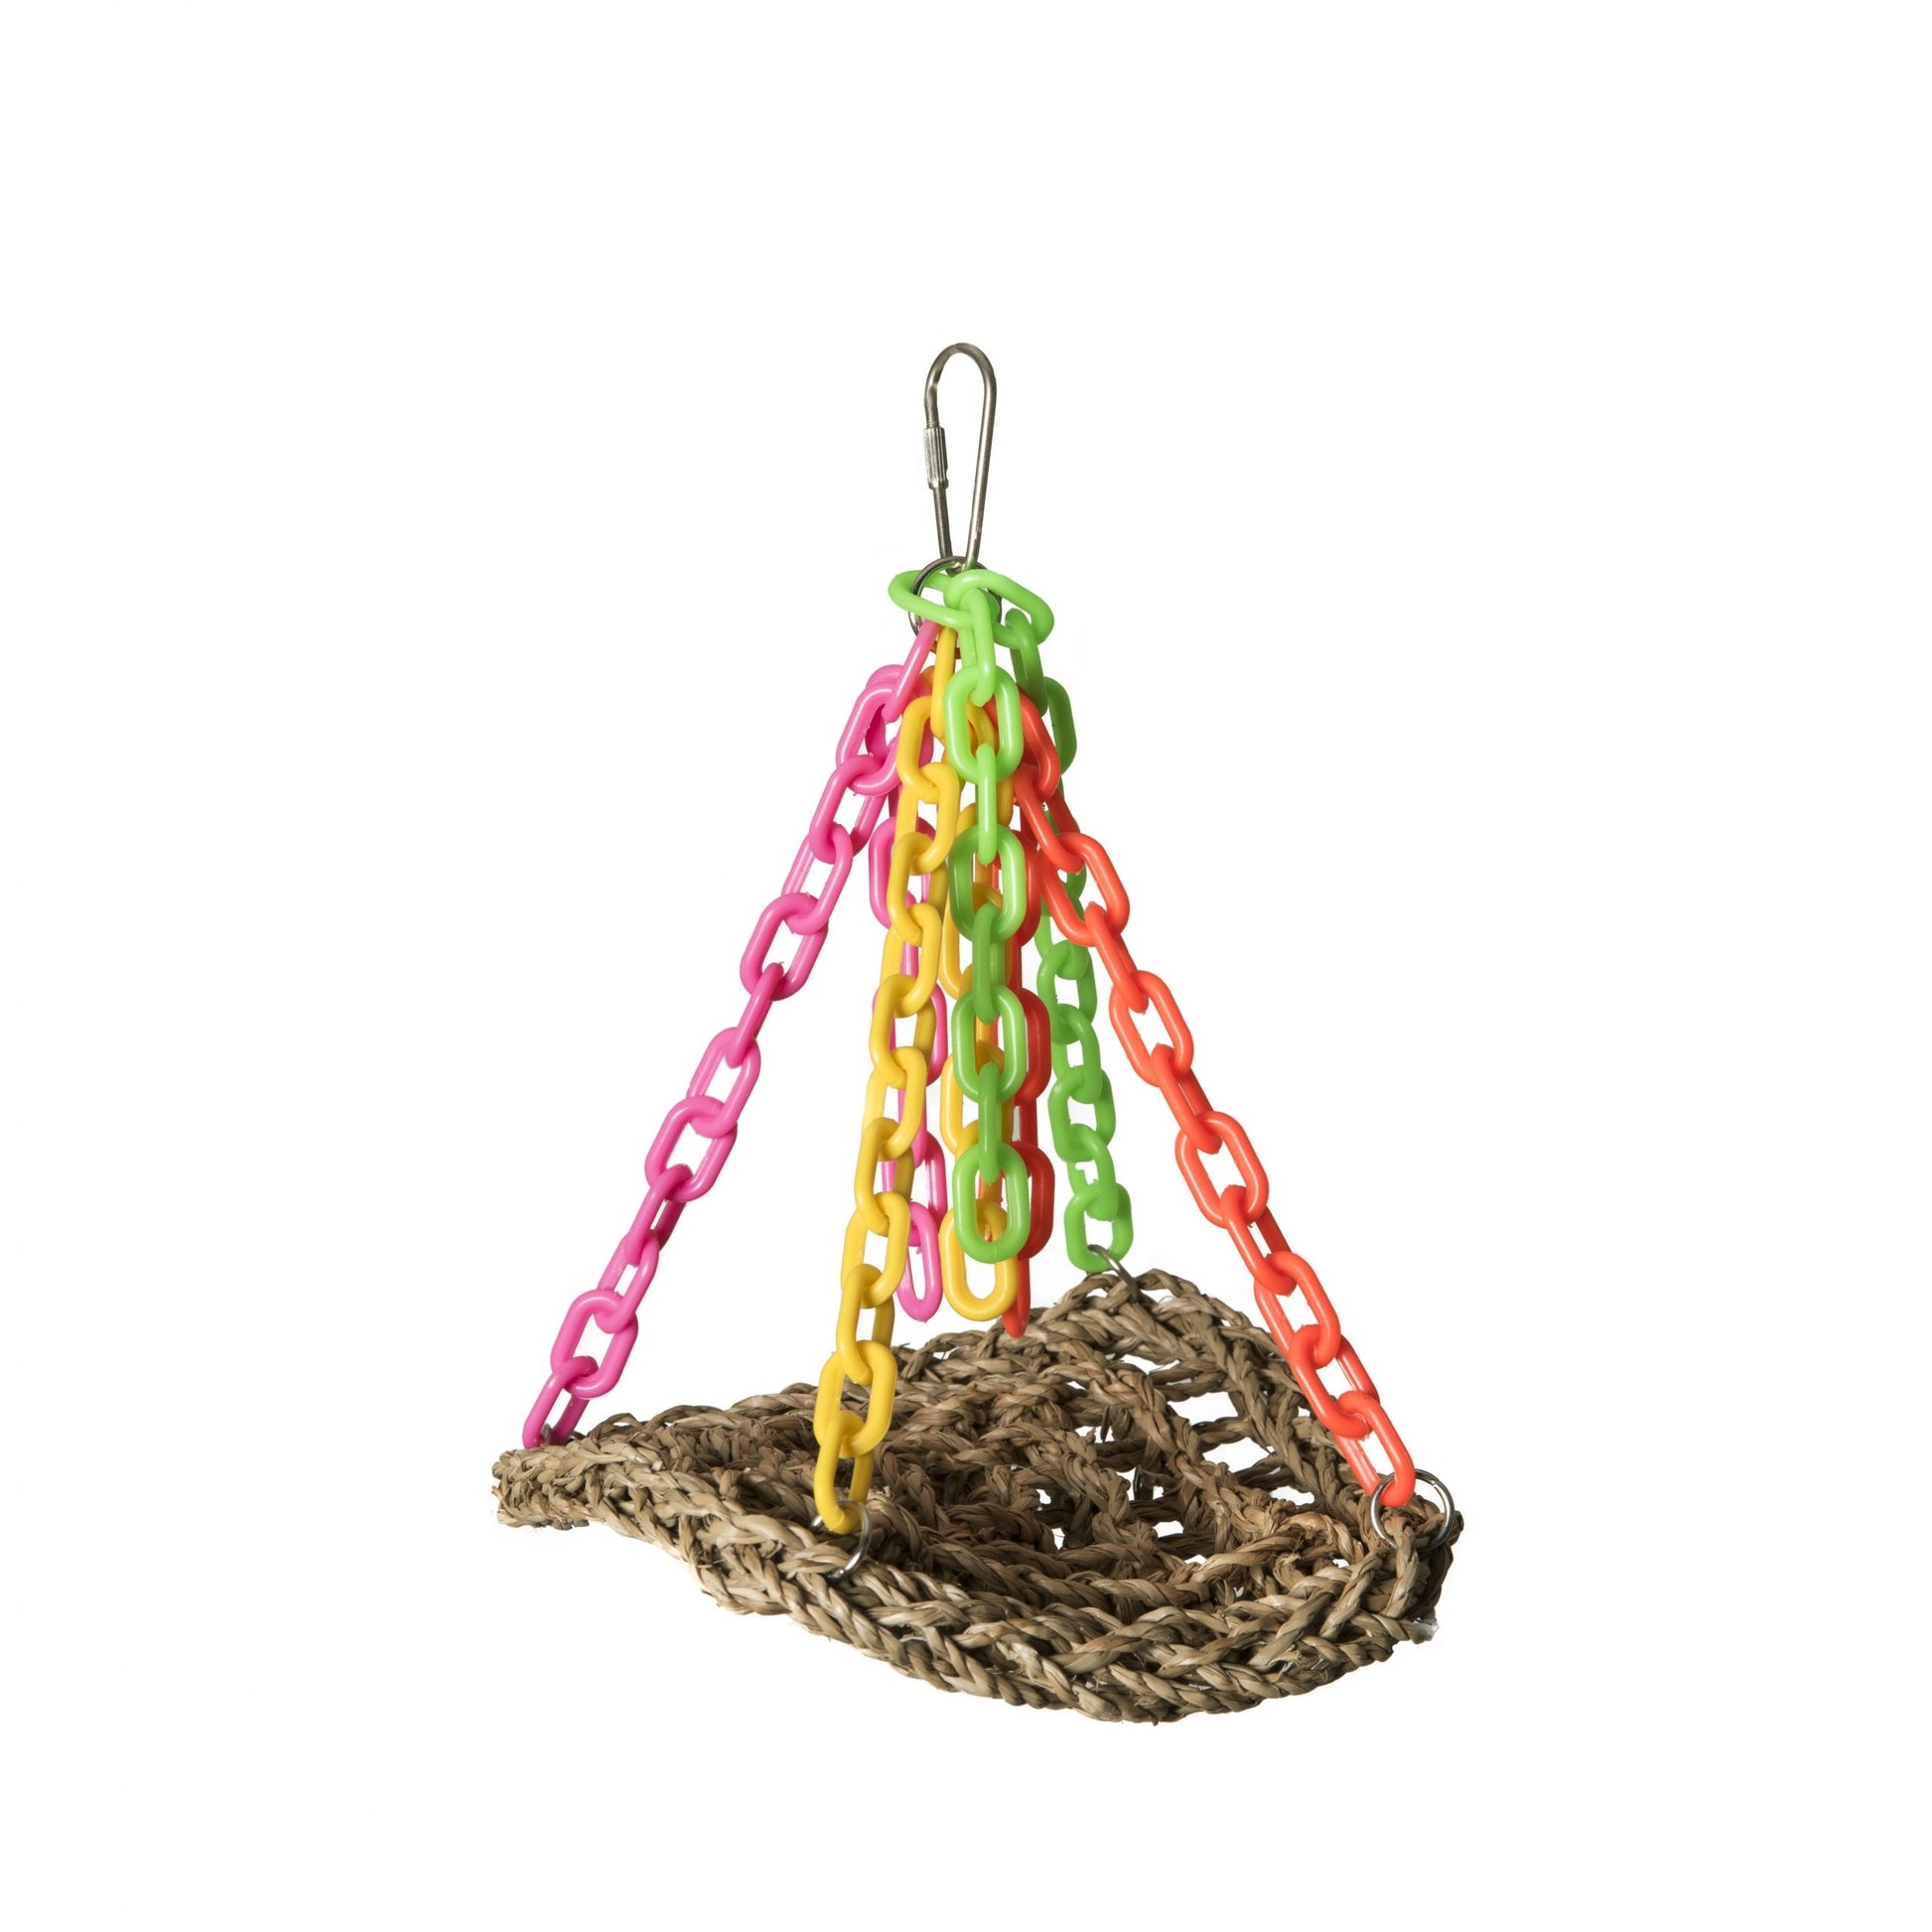 Grass woven party hammock bird cage toy